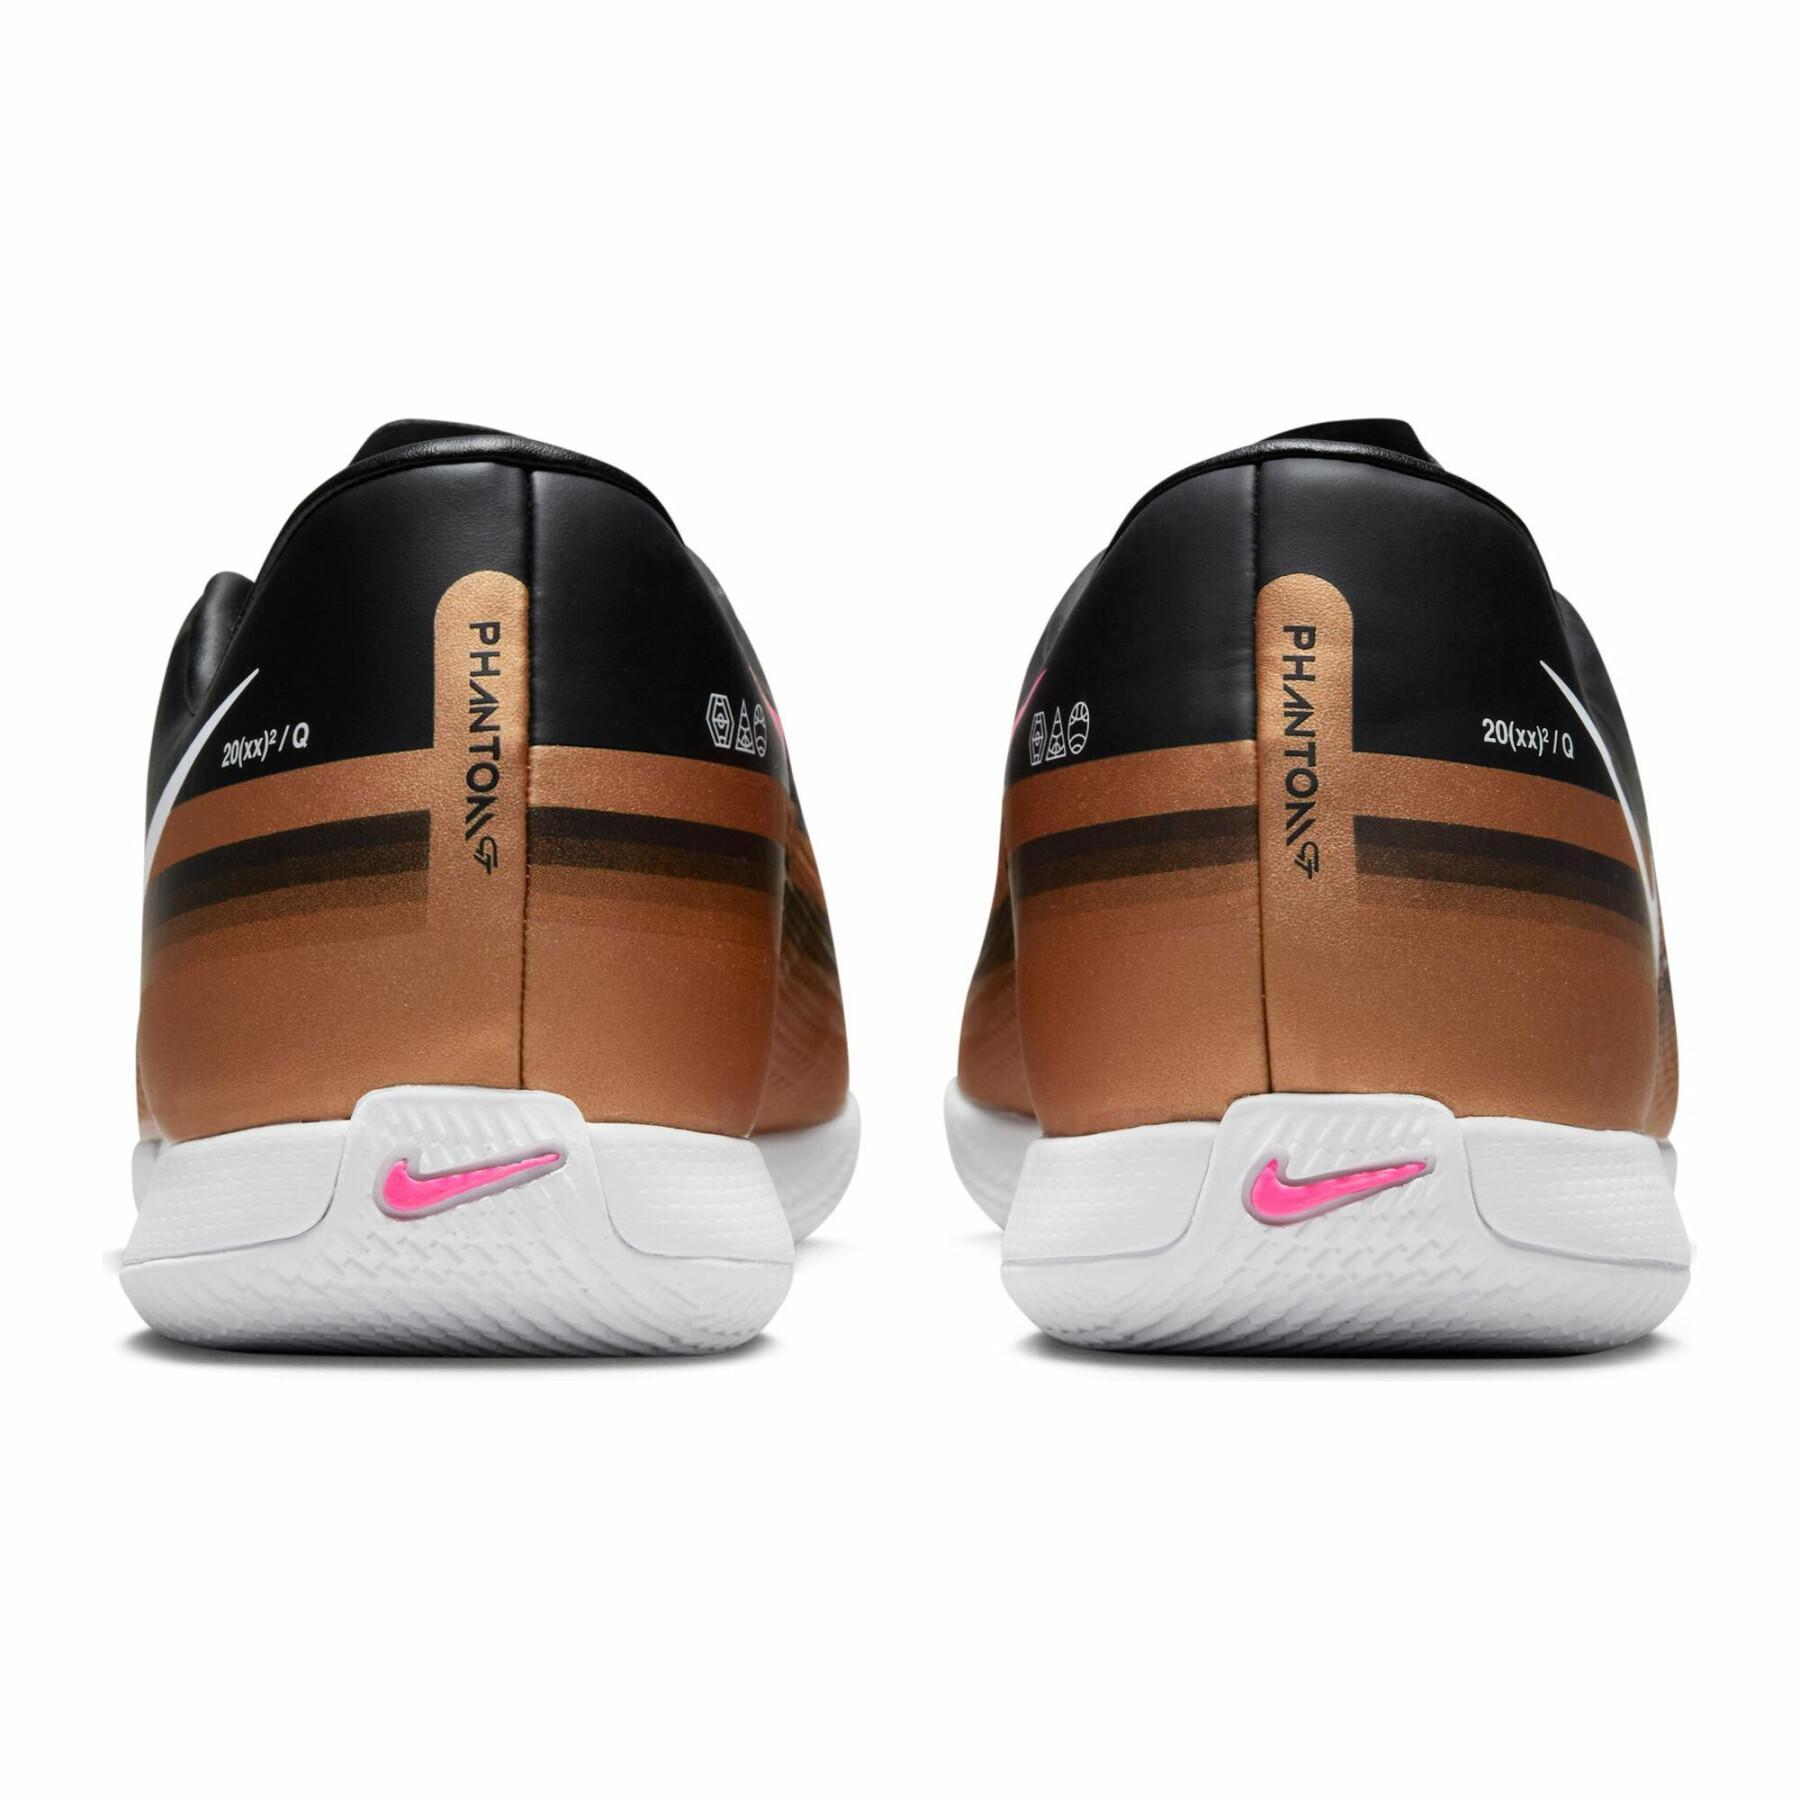 Soccer shoes Nike PhantomGT2 Academy IC - Generation Pack